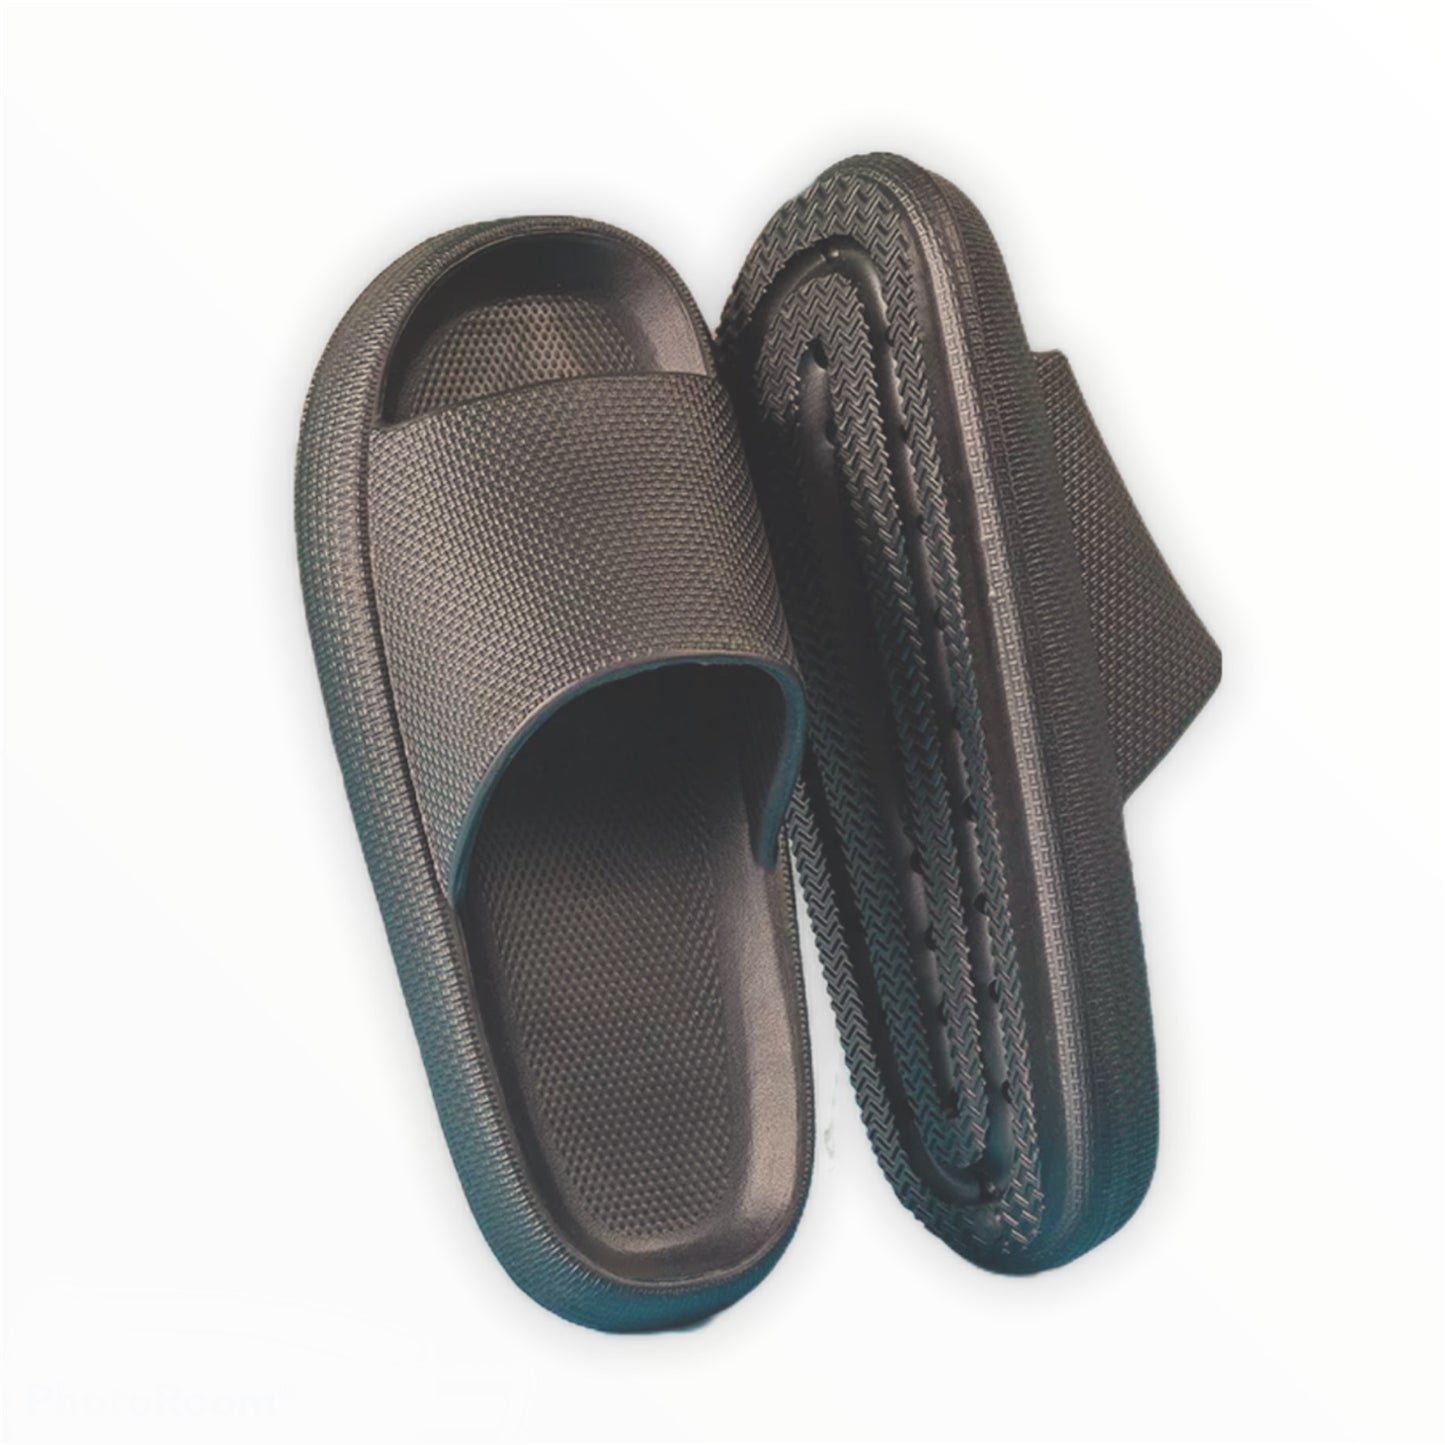 Black yeezy fashion slippers, non-slip, comfy, washable and waterproof slippers, my pillow slides, sandals, thick solded, sootheez slippers, rubber sold slides. sootheze slippers, arch support slippers, anti-slip, washable sandals, hot girl fashion, summer beach sandals., thick sole slippers, best selling sandals, water slides, elmo yeezy slides, nike offline slides.